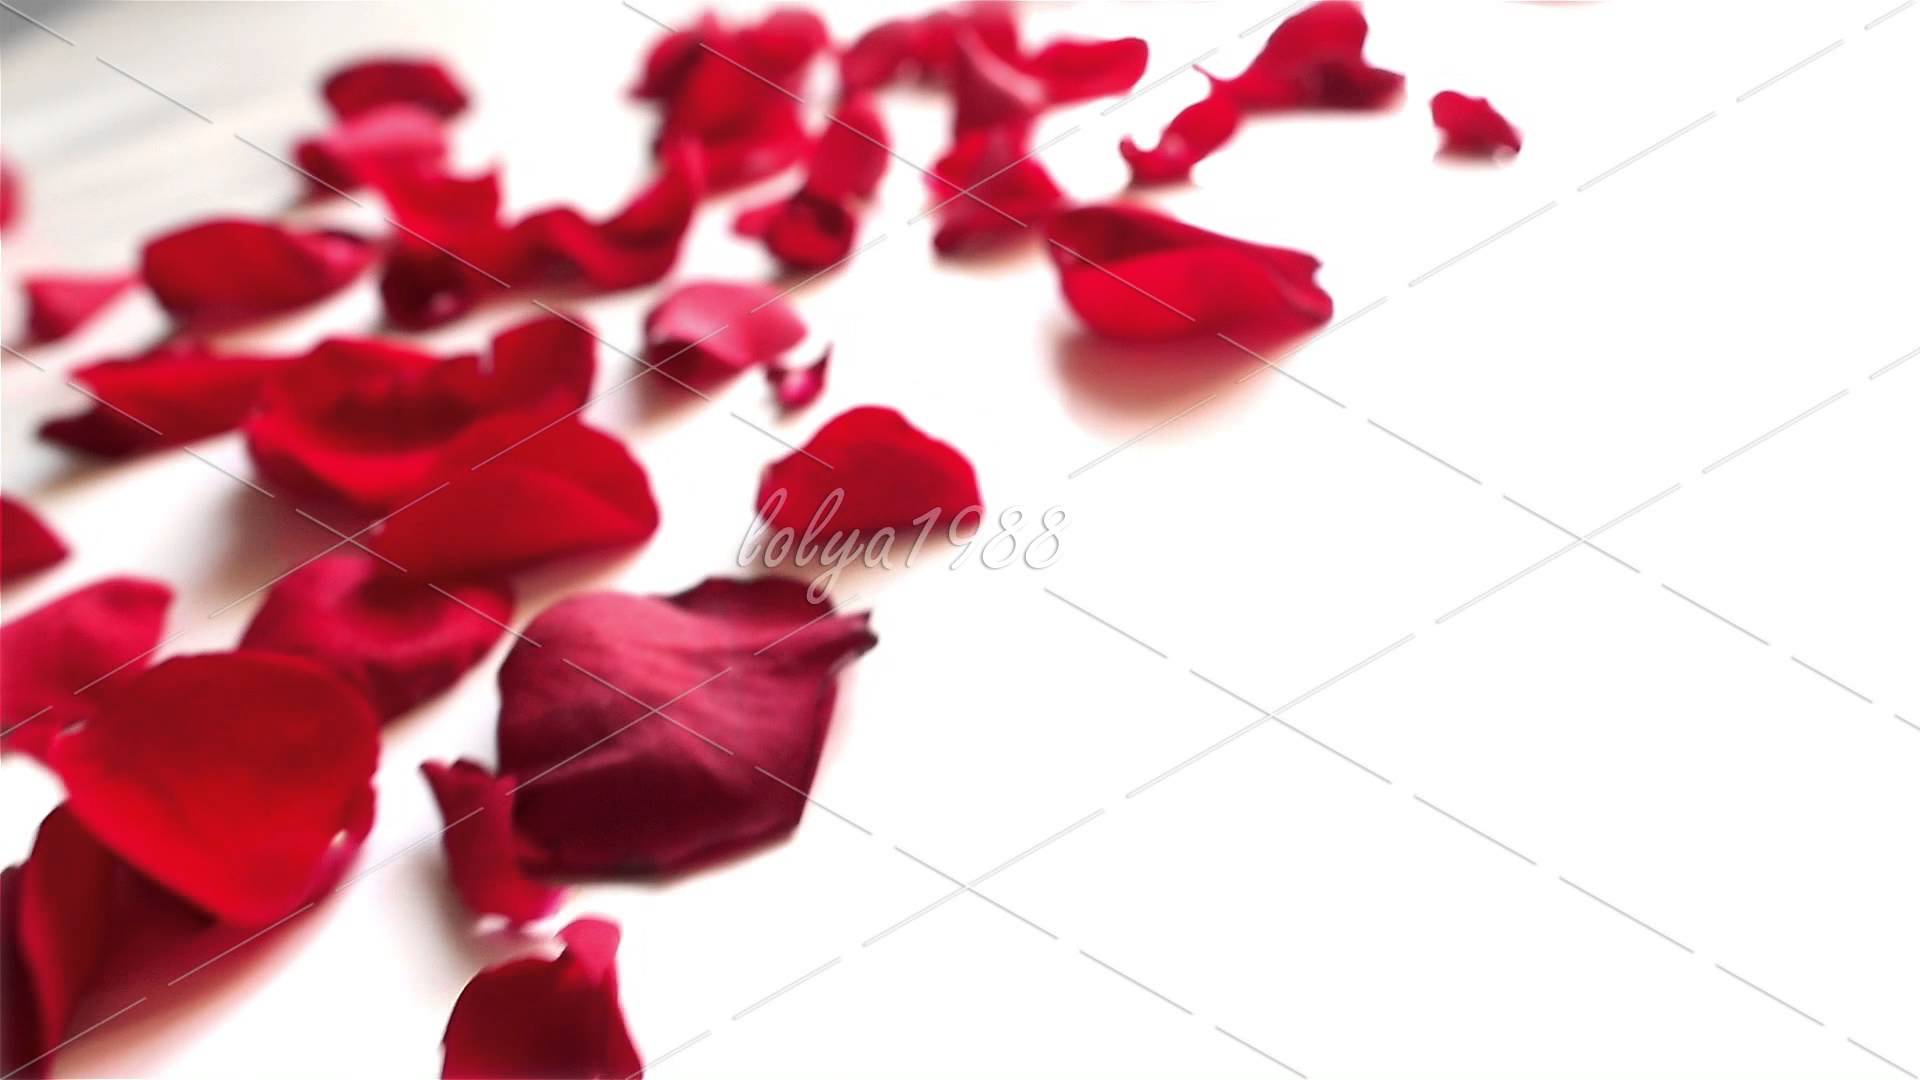 Red rose petals on white background - YouTube